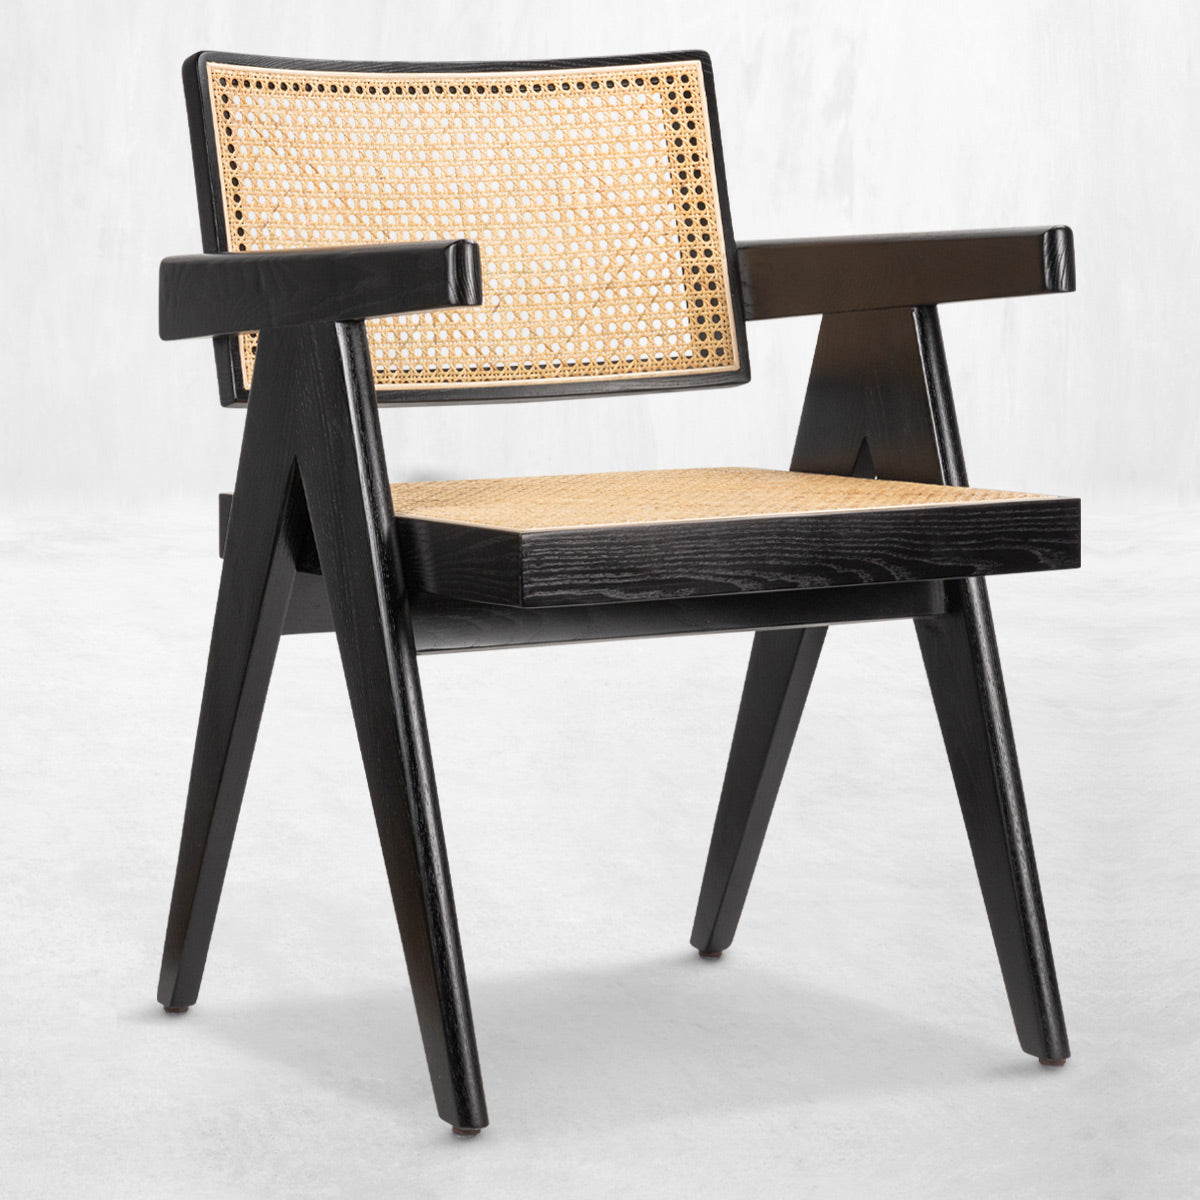 Mr. Cane Dining Chair